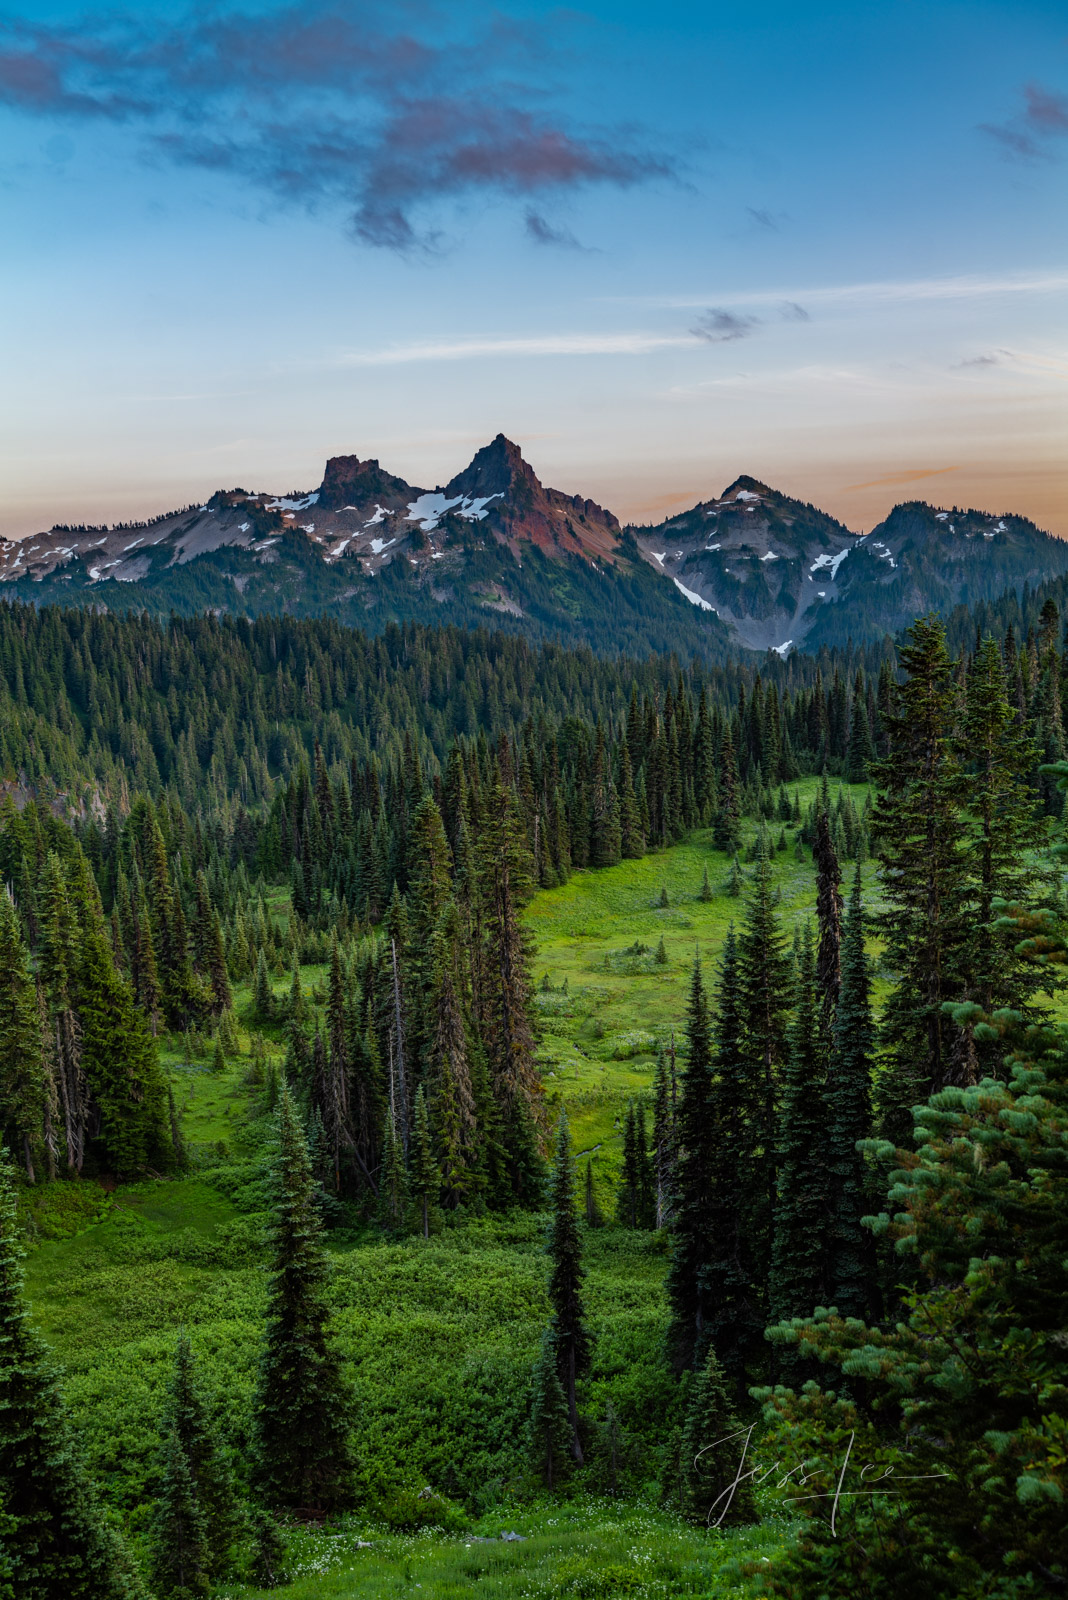 Rainer Wild is a beautiful picture of the splendor of Mt. Rainier National Park. Flowered meadows by summer and colors of fall...